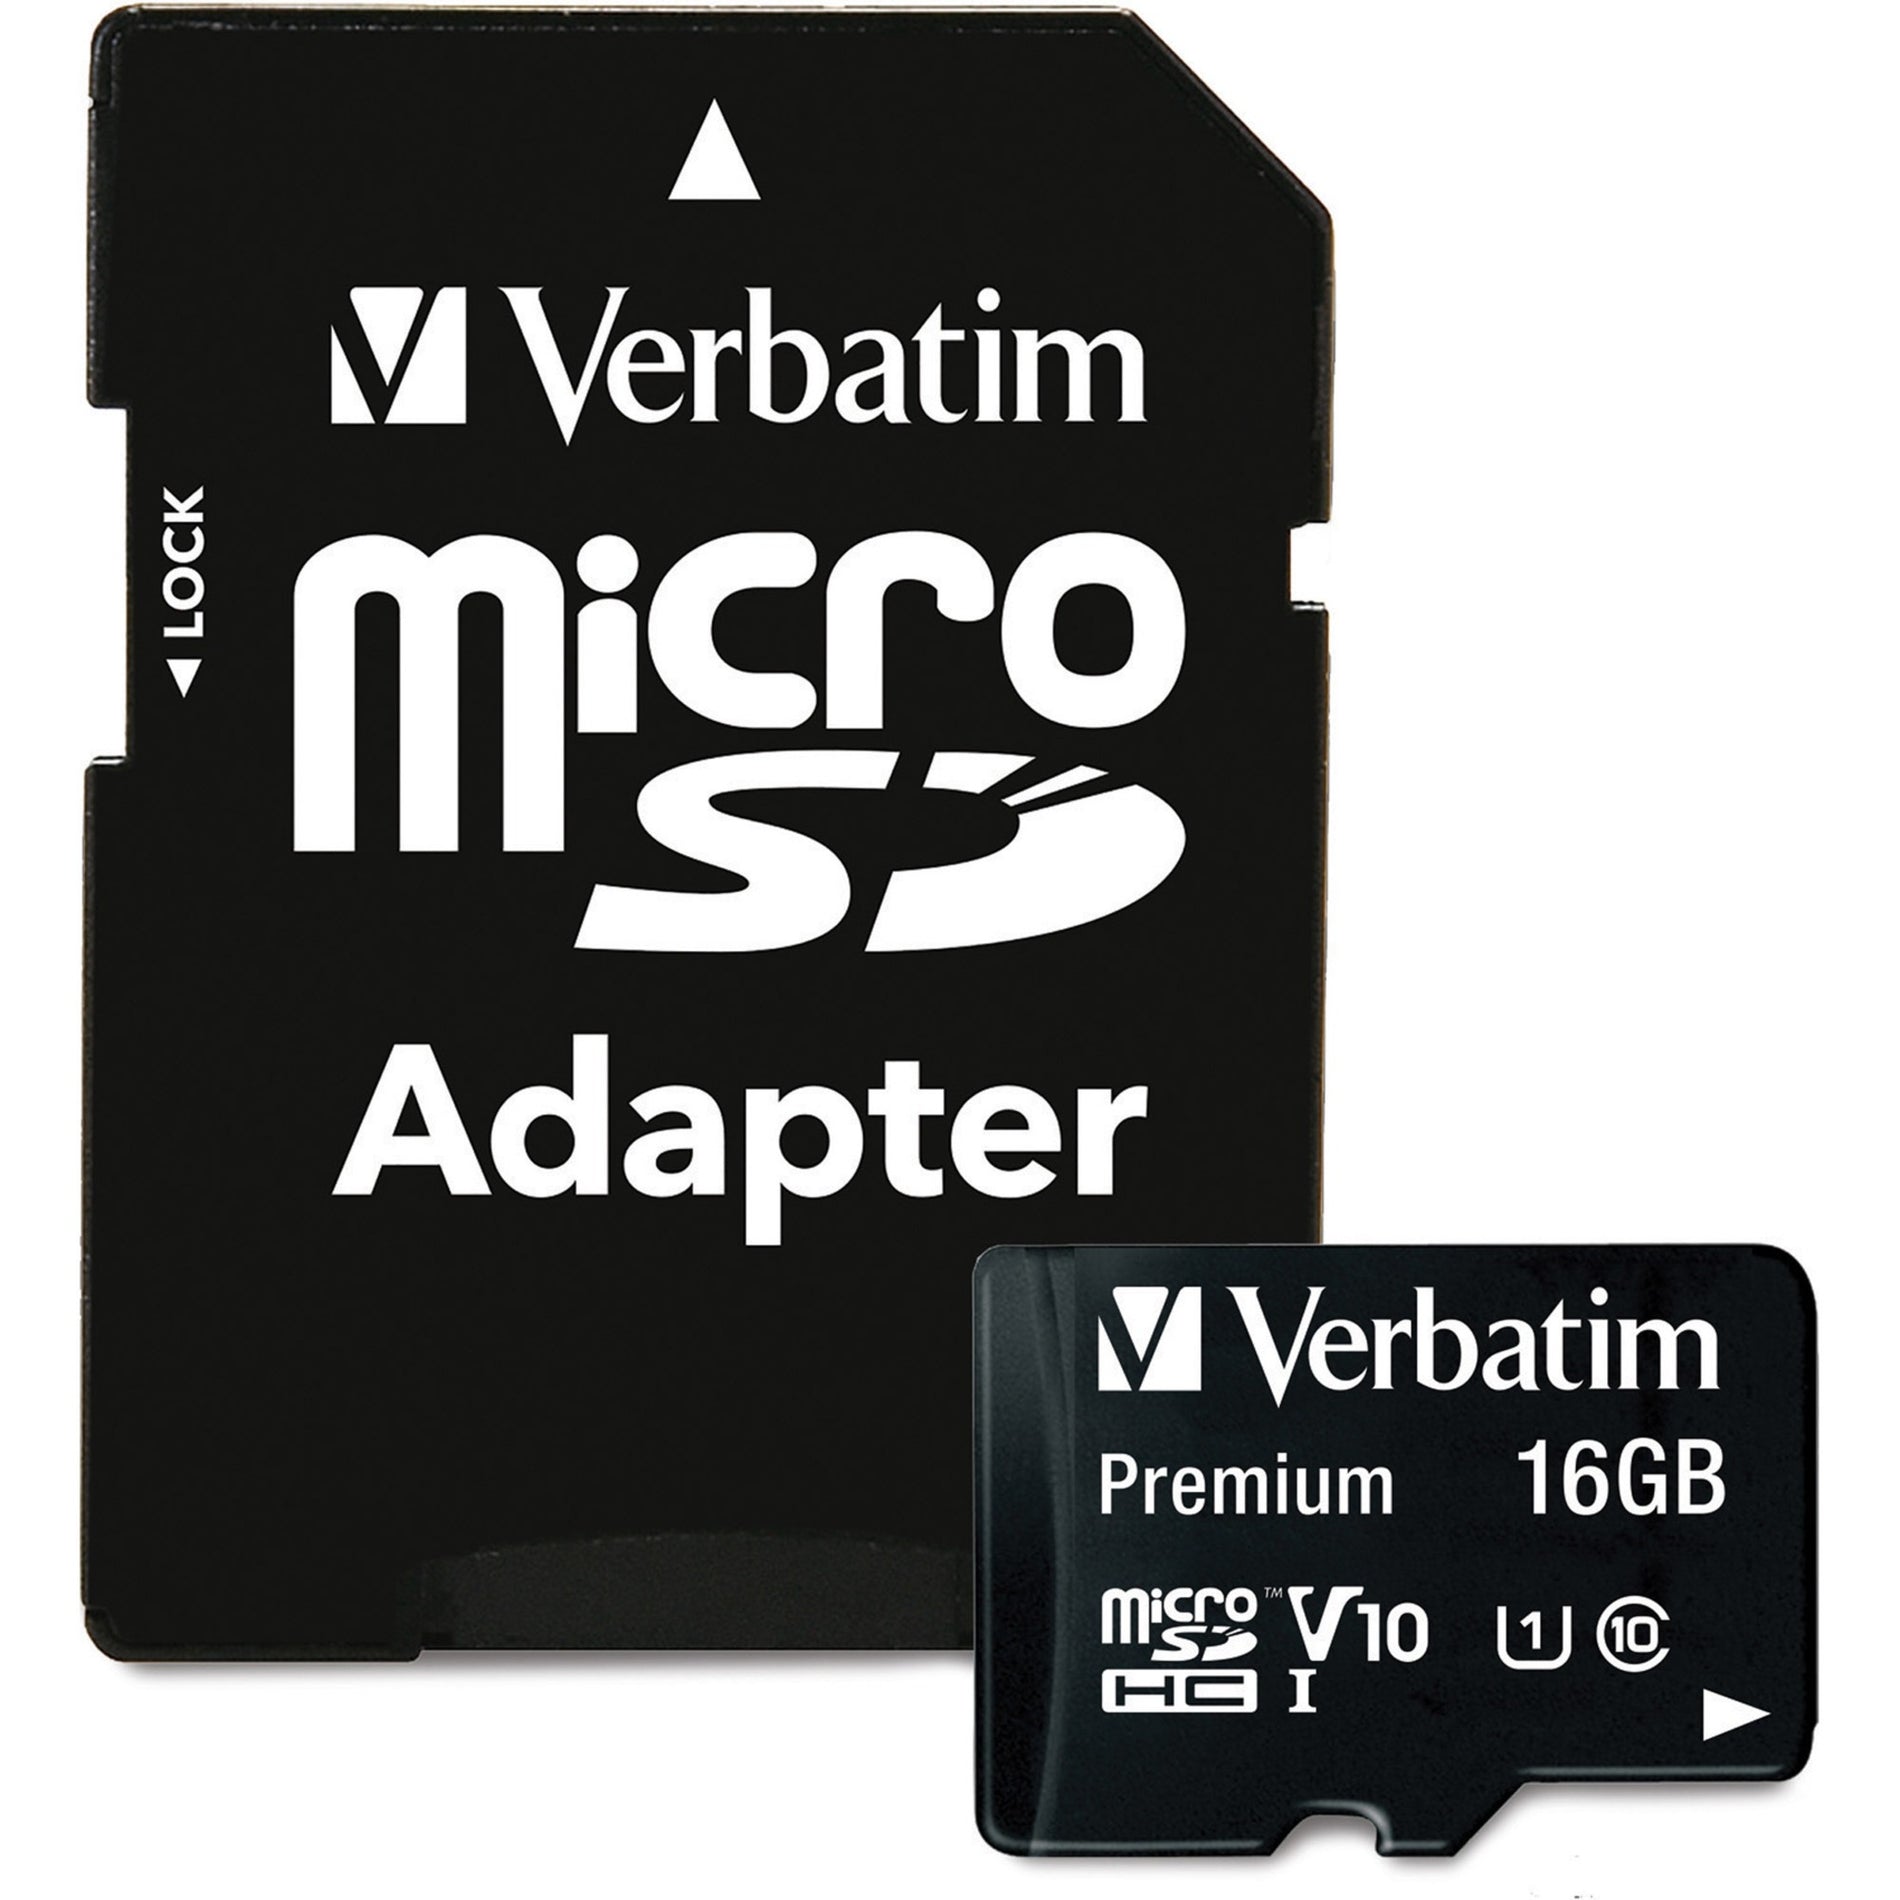 Verbatim 16GB Premium microSDHC Memory Card with Adapter, UHS-I Class 10 (44082) Collections image